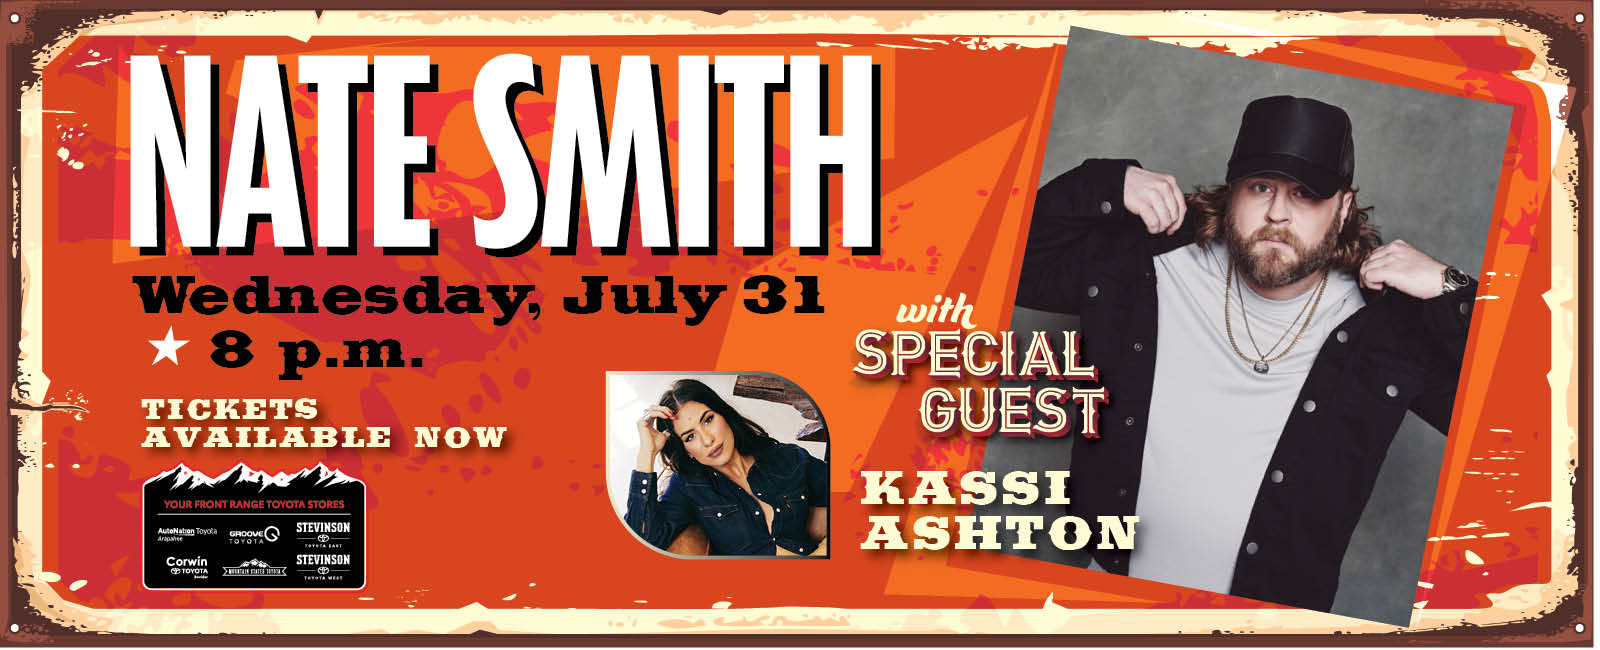 Nate Smith with special guest Kassi Ashton - Wednesday, July 31